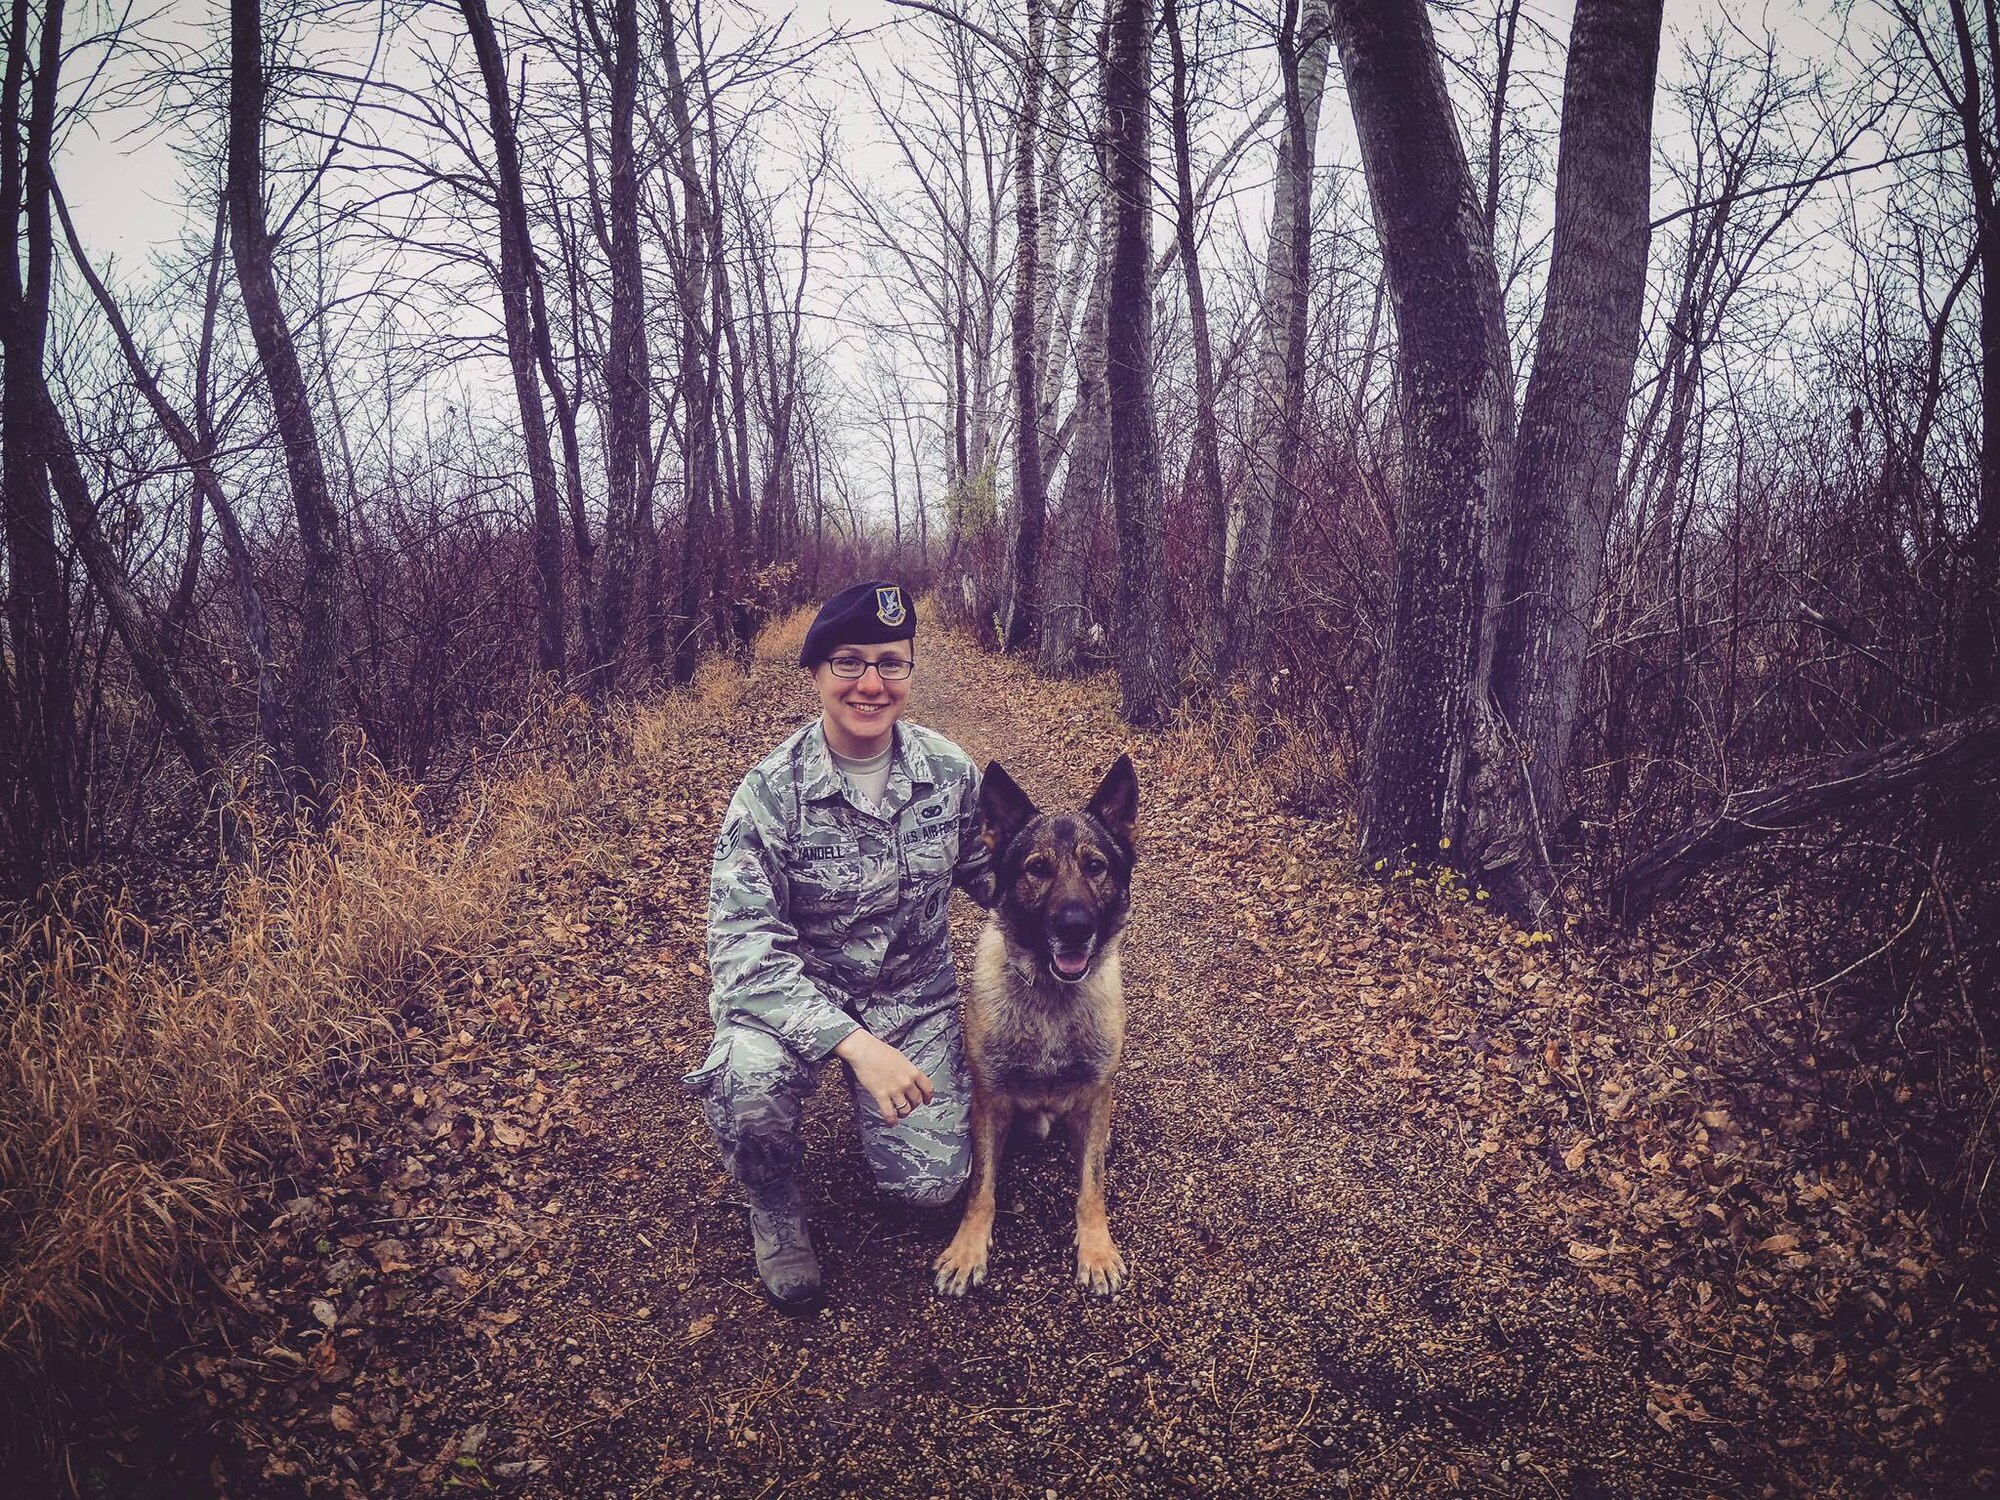 Senior Airman Sara Yandell, 319th Security Forces Squadron military working dog handler, poses for a photo with her dog Atti. Yandell said her love of nature keeps her grounded while her wife is deployed. (Courtesy photo taken by Senior Airman Sara Yandell)